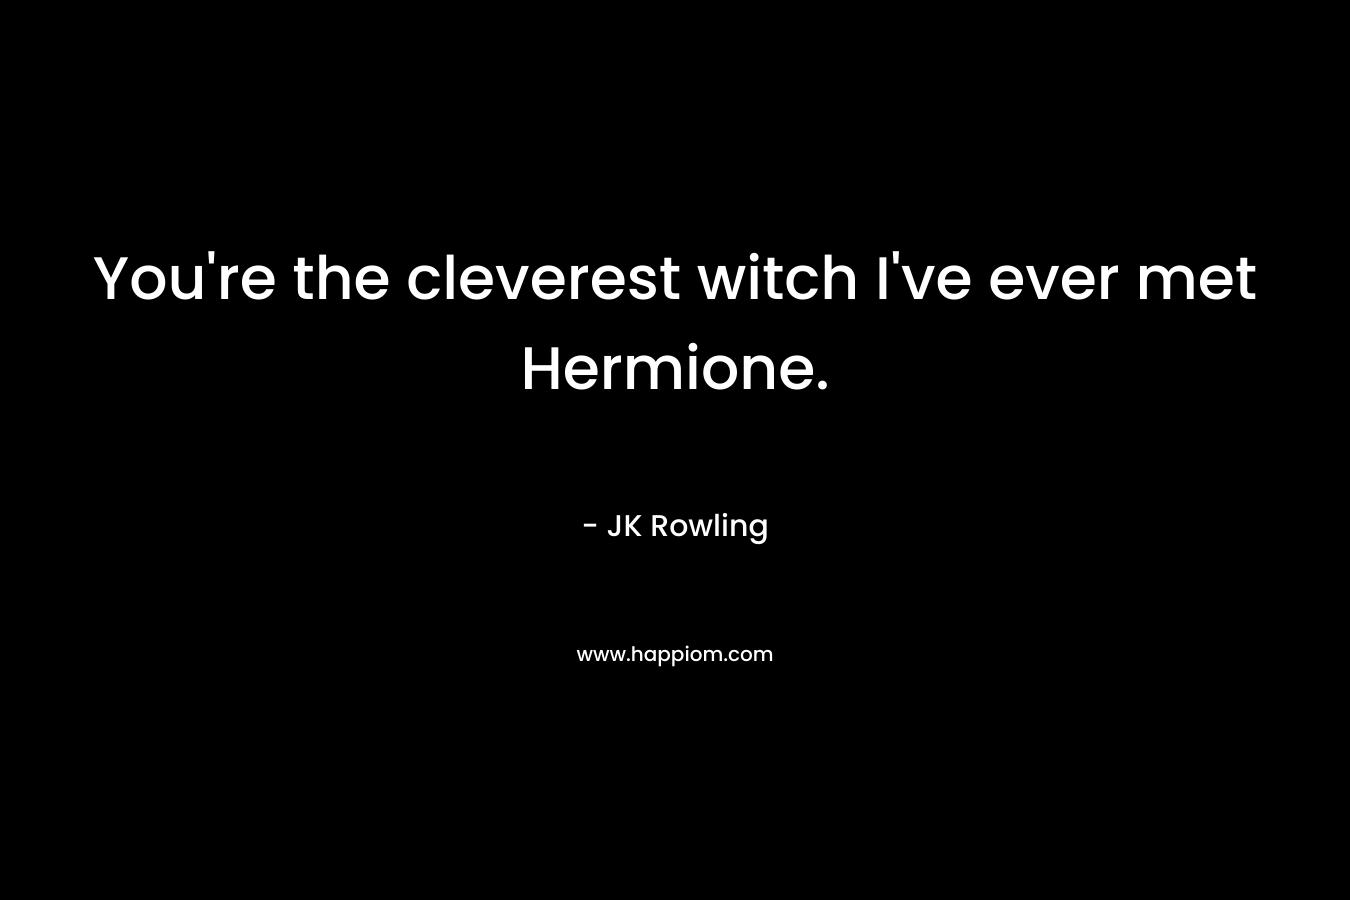 You’re the cleverest witch I’ve ever met Hermione. – JK Rowling